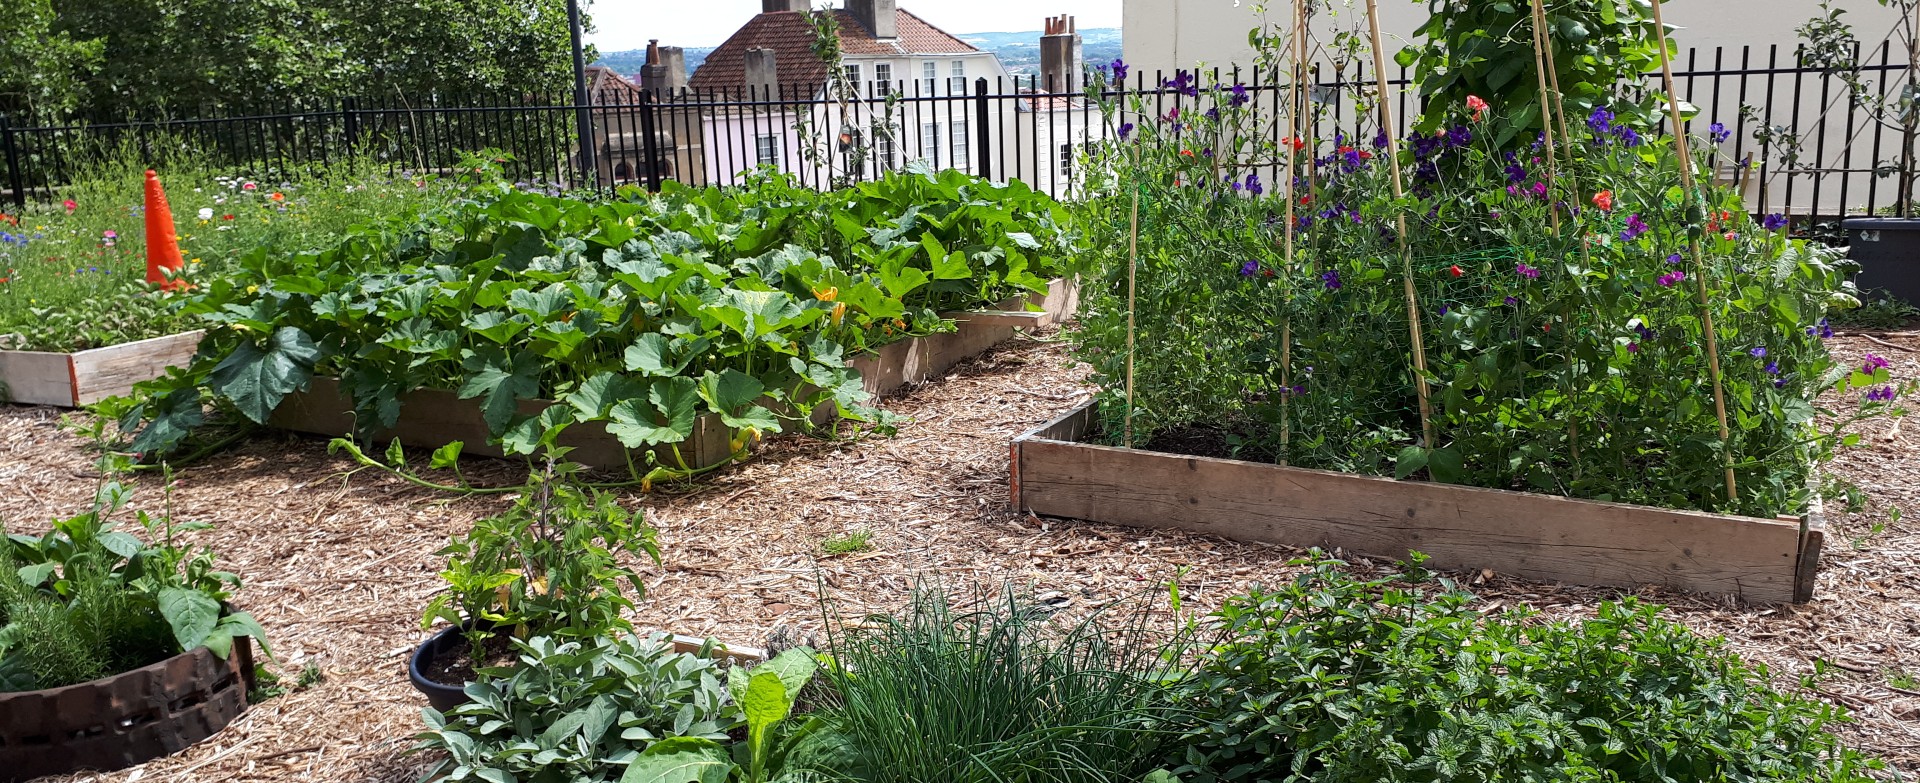 Flower beds and plants on the campus allotment